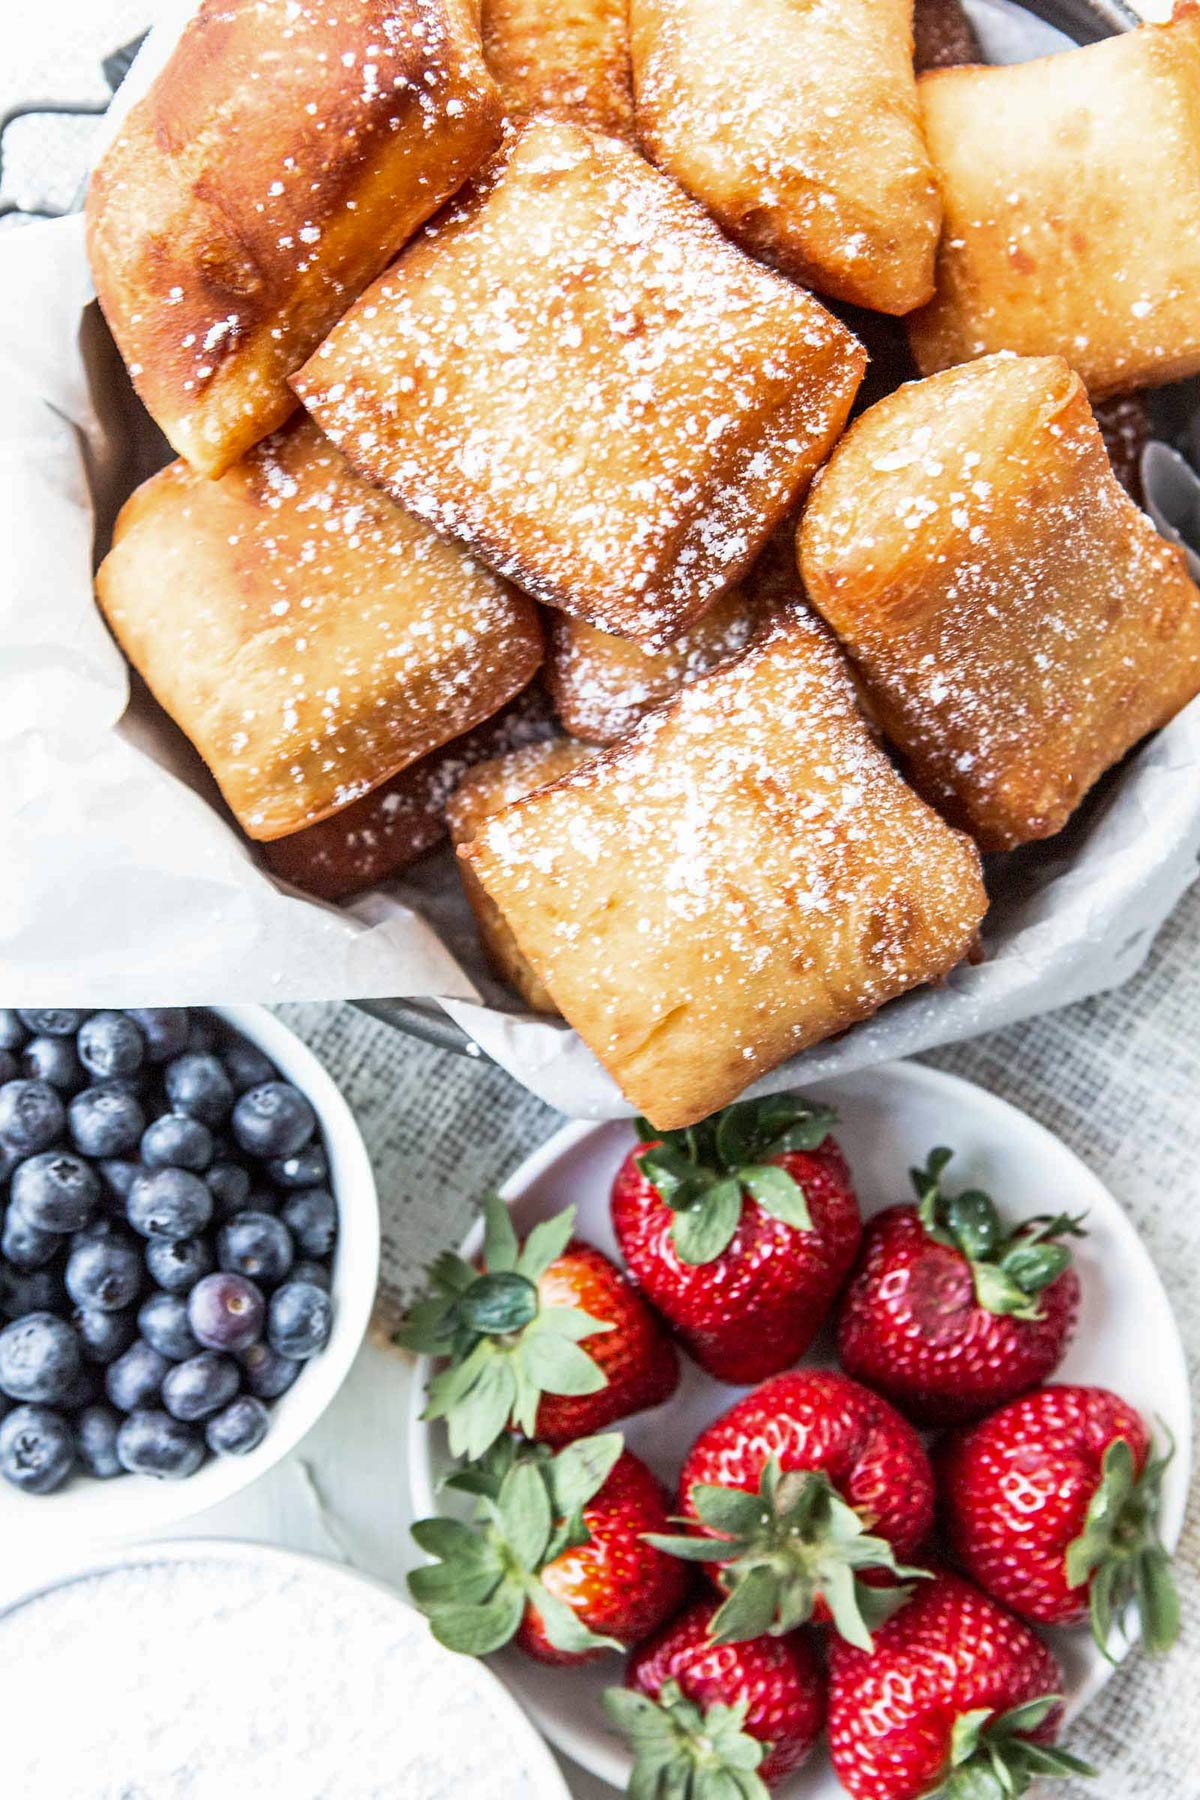 beignets with powdered sugar on top inside of a bowl with two small bowls on the side filled with strawberries and blueberries.